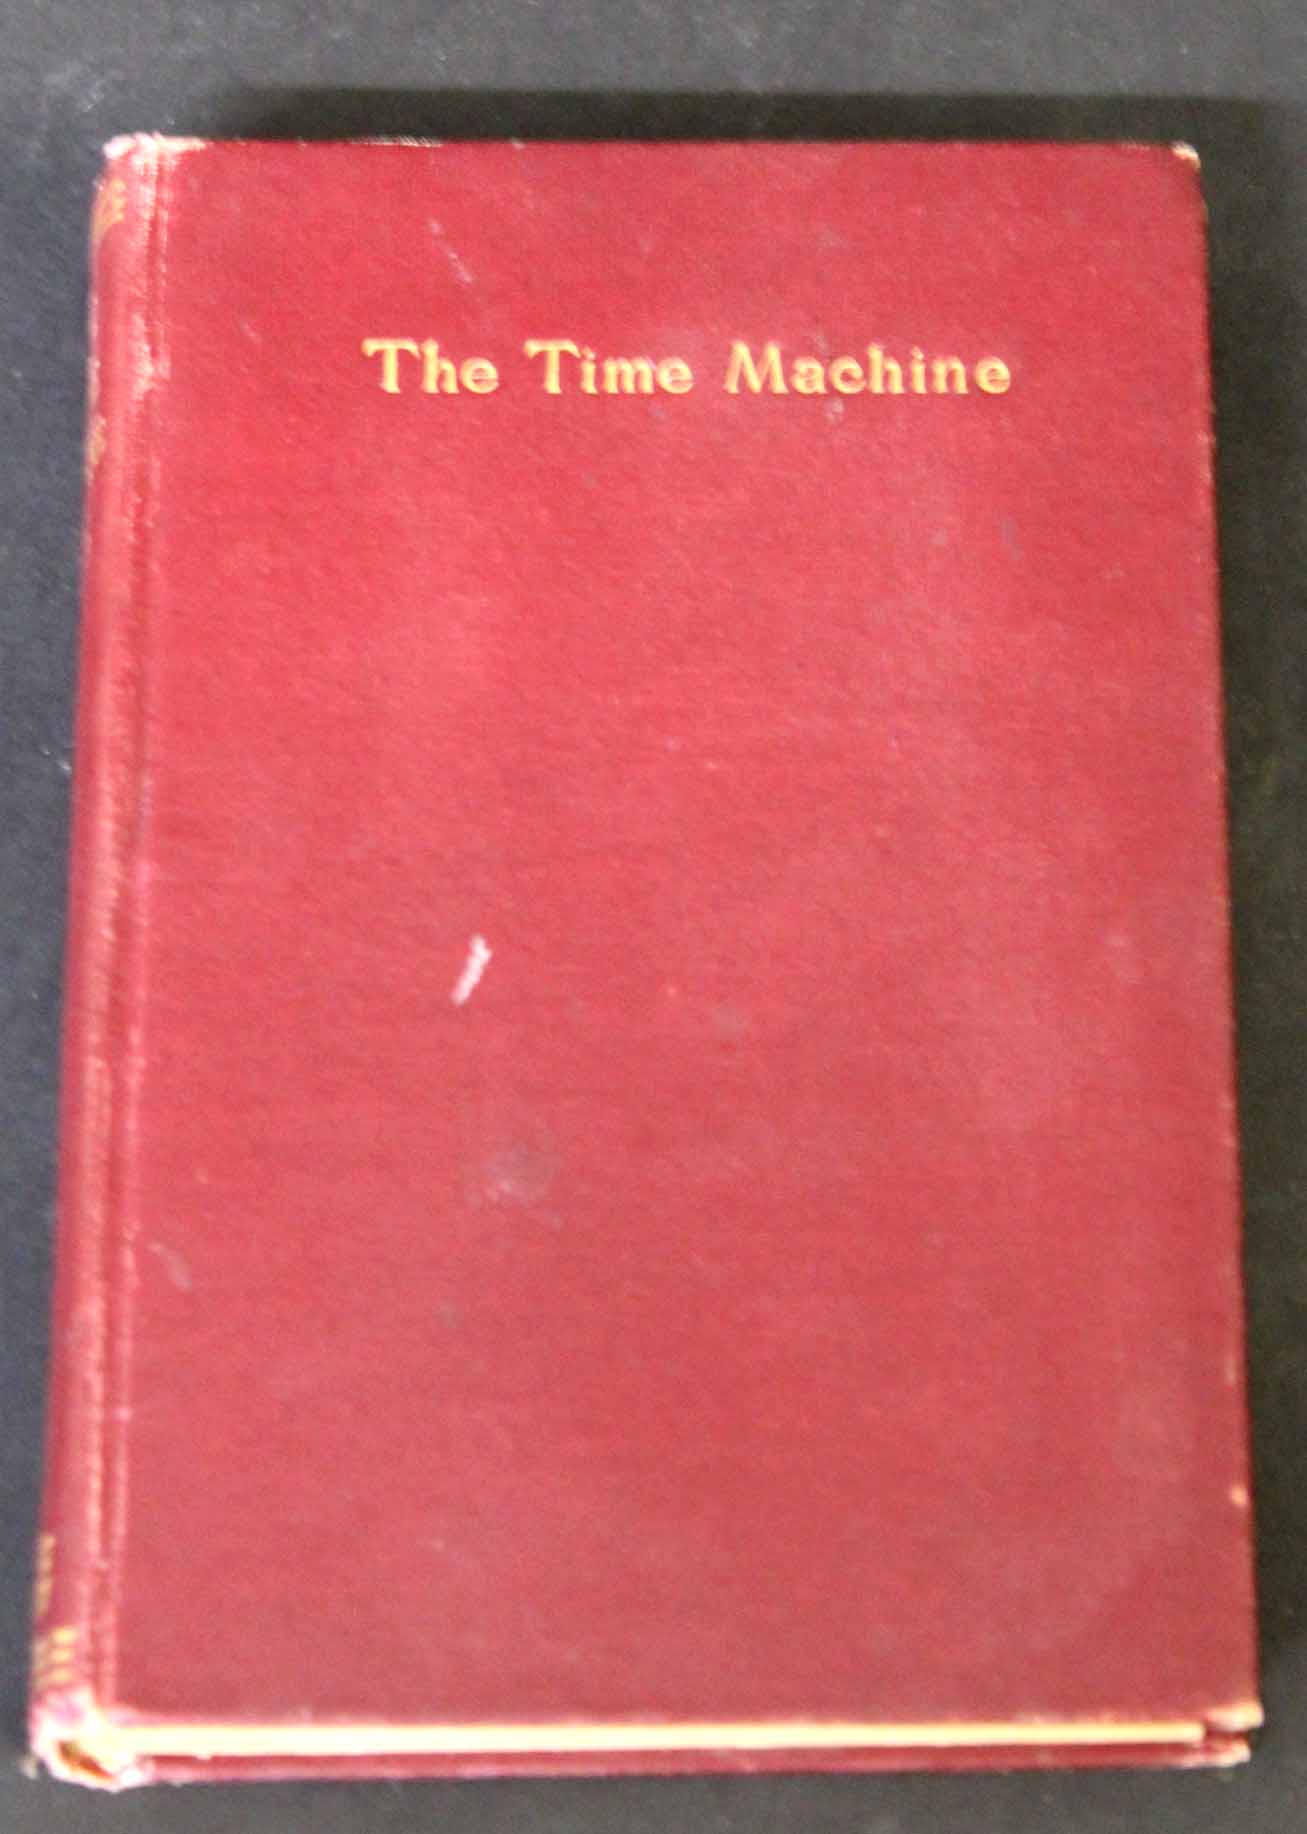 H G WELLS: THE TIME MACHINE, New York, Henry Holt & Co, 1895, 1st edition, 3rd issue, original - Image 2 of 2